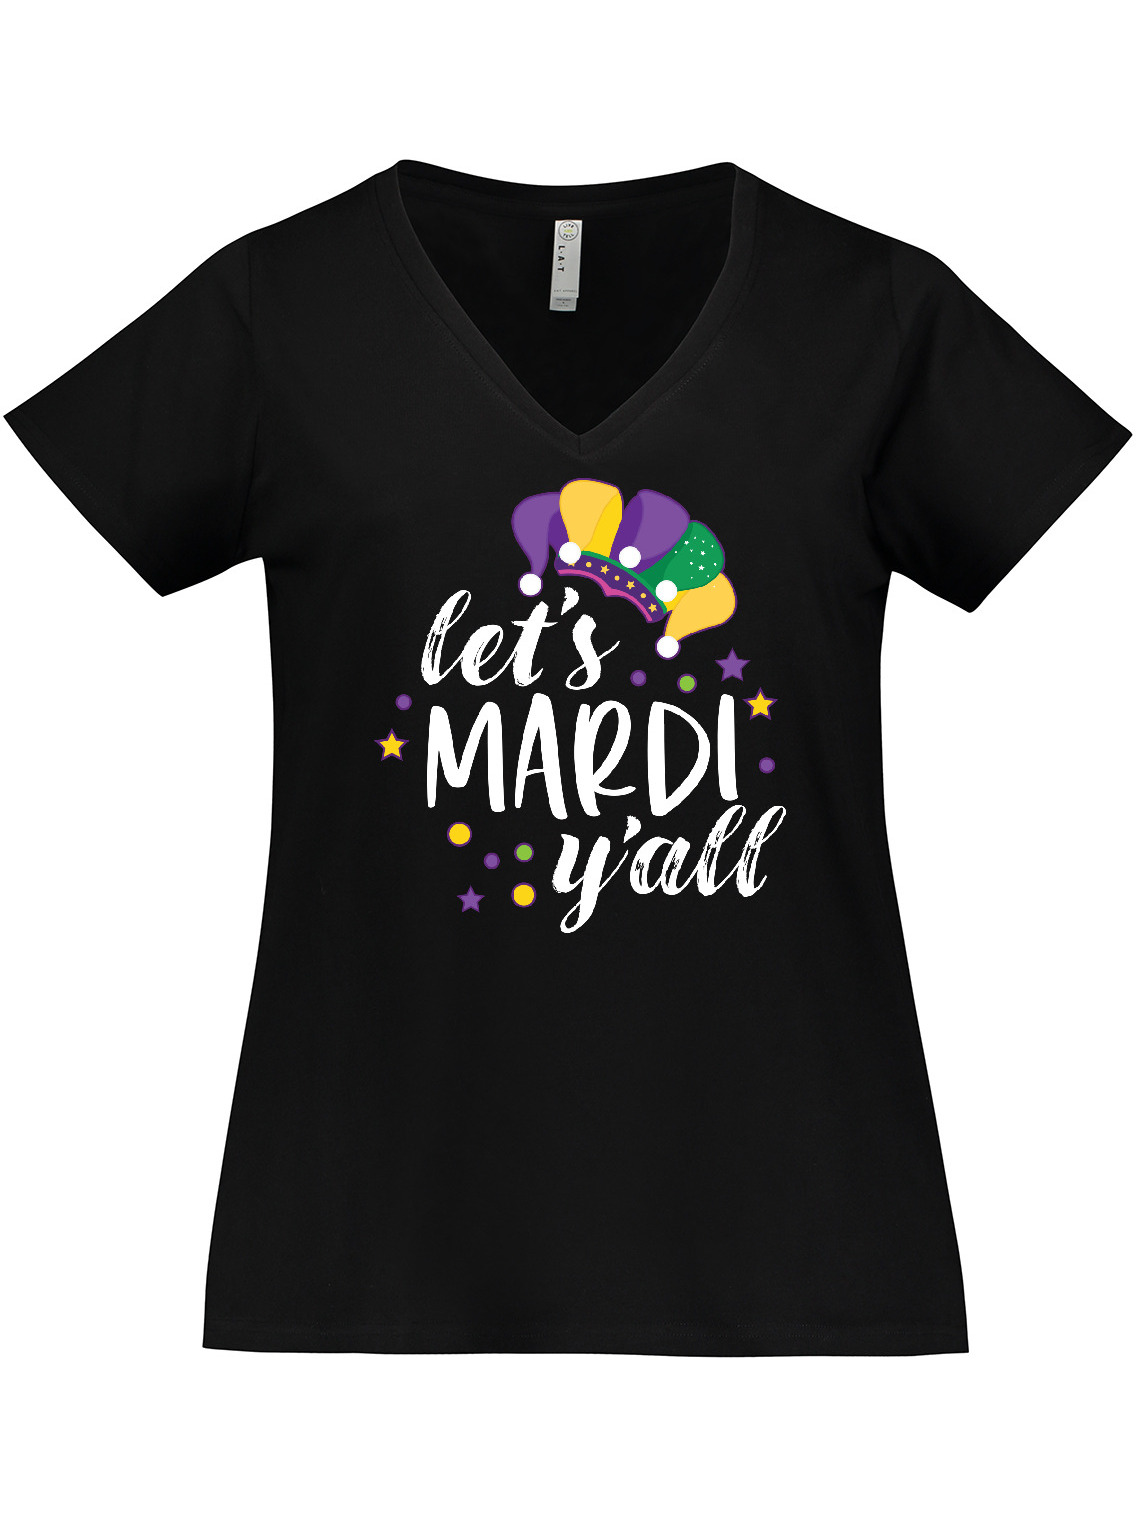 Inktastic Mardi Gras Let's Mardi Y'all with Jester Hat Women's Plus Size V-Neck T-Shirt - image 1 of 4